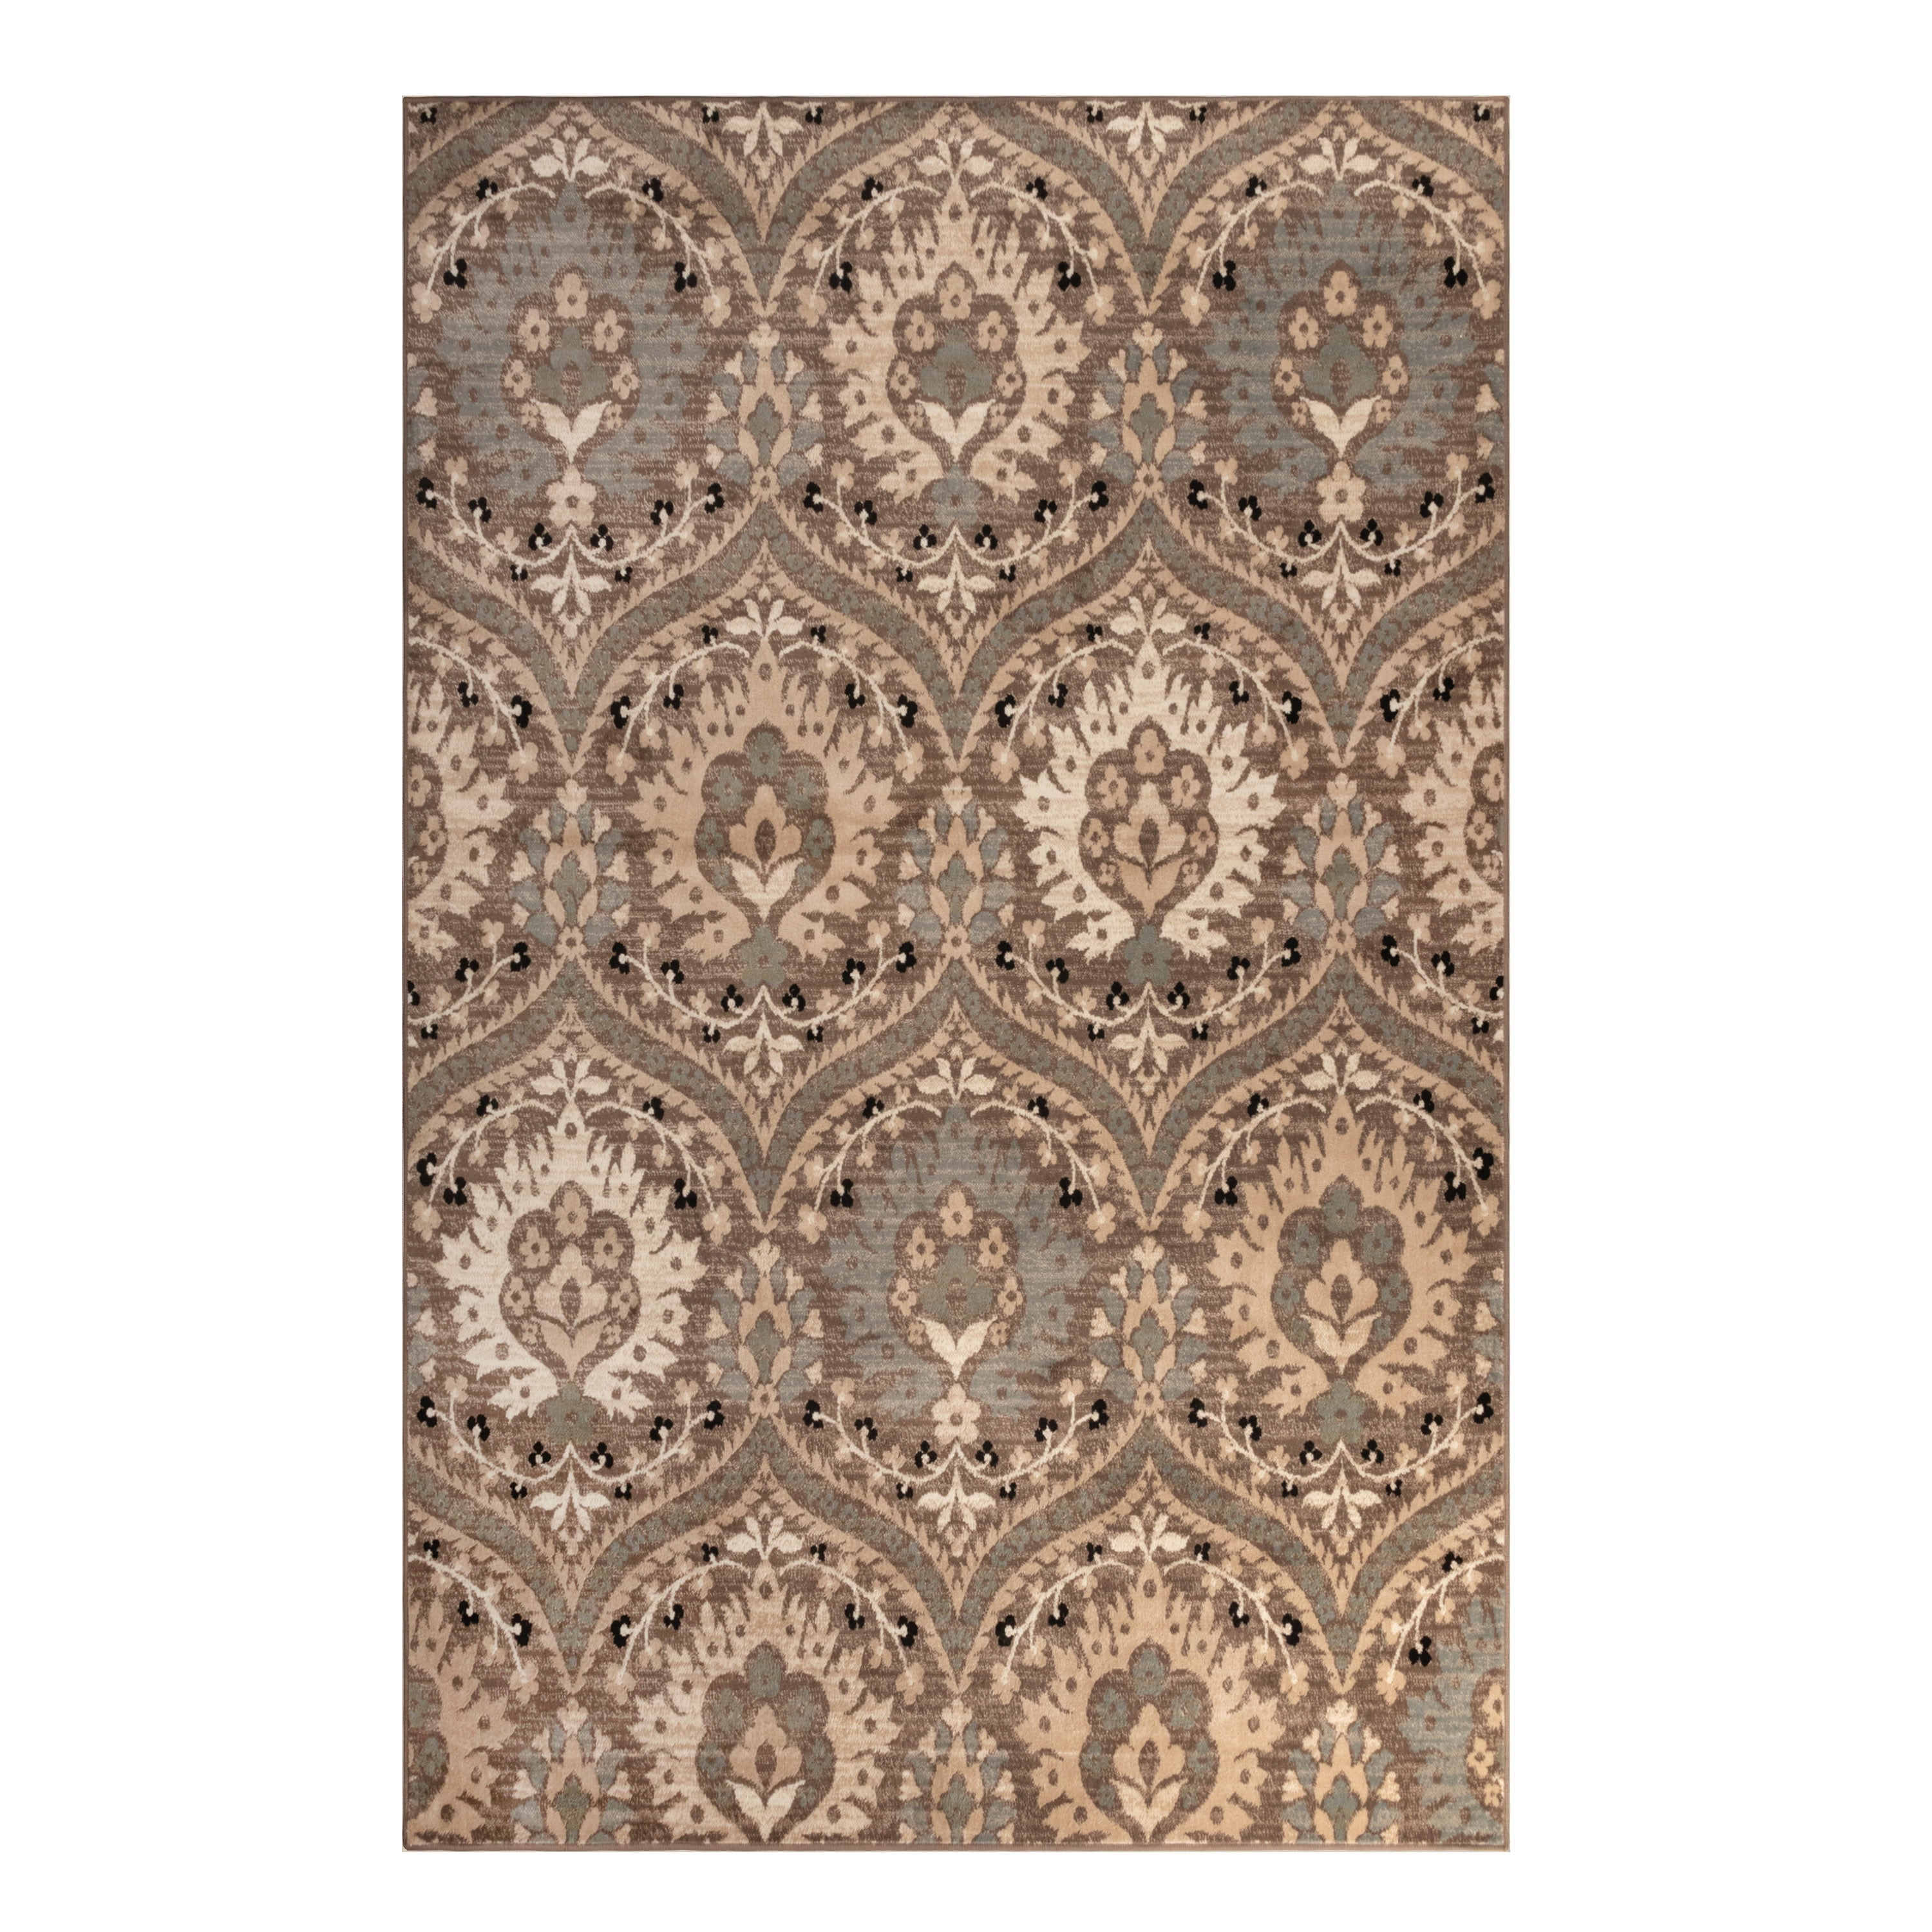 Fleur Collection Bedroom SUPERIOR Indoor Large Area Rug with Jute Backing Entryway Hardwood Floors Office 5' x 8' Hallway Dorm Kitchen Red Bold Floral Design Perfect for Living Room 